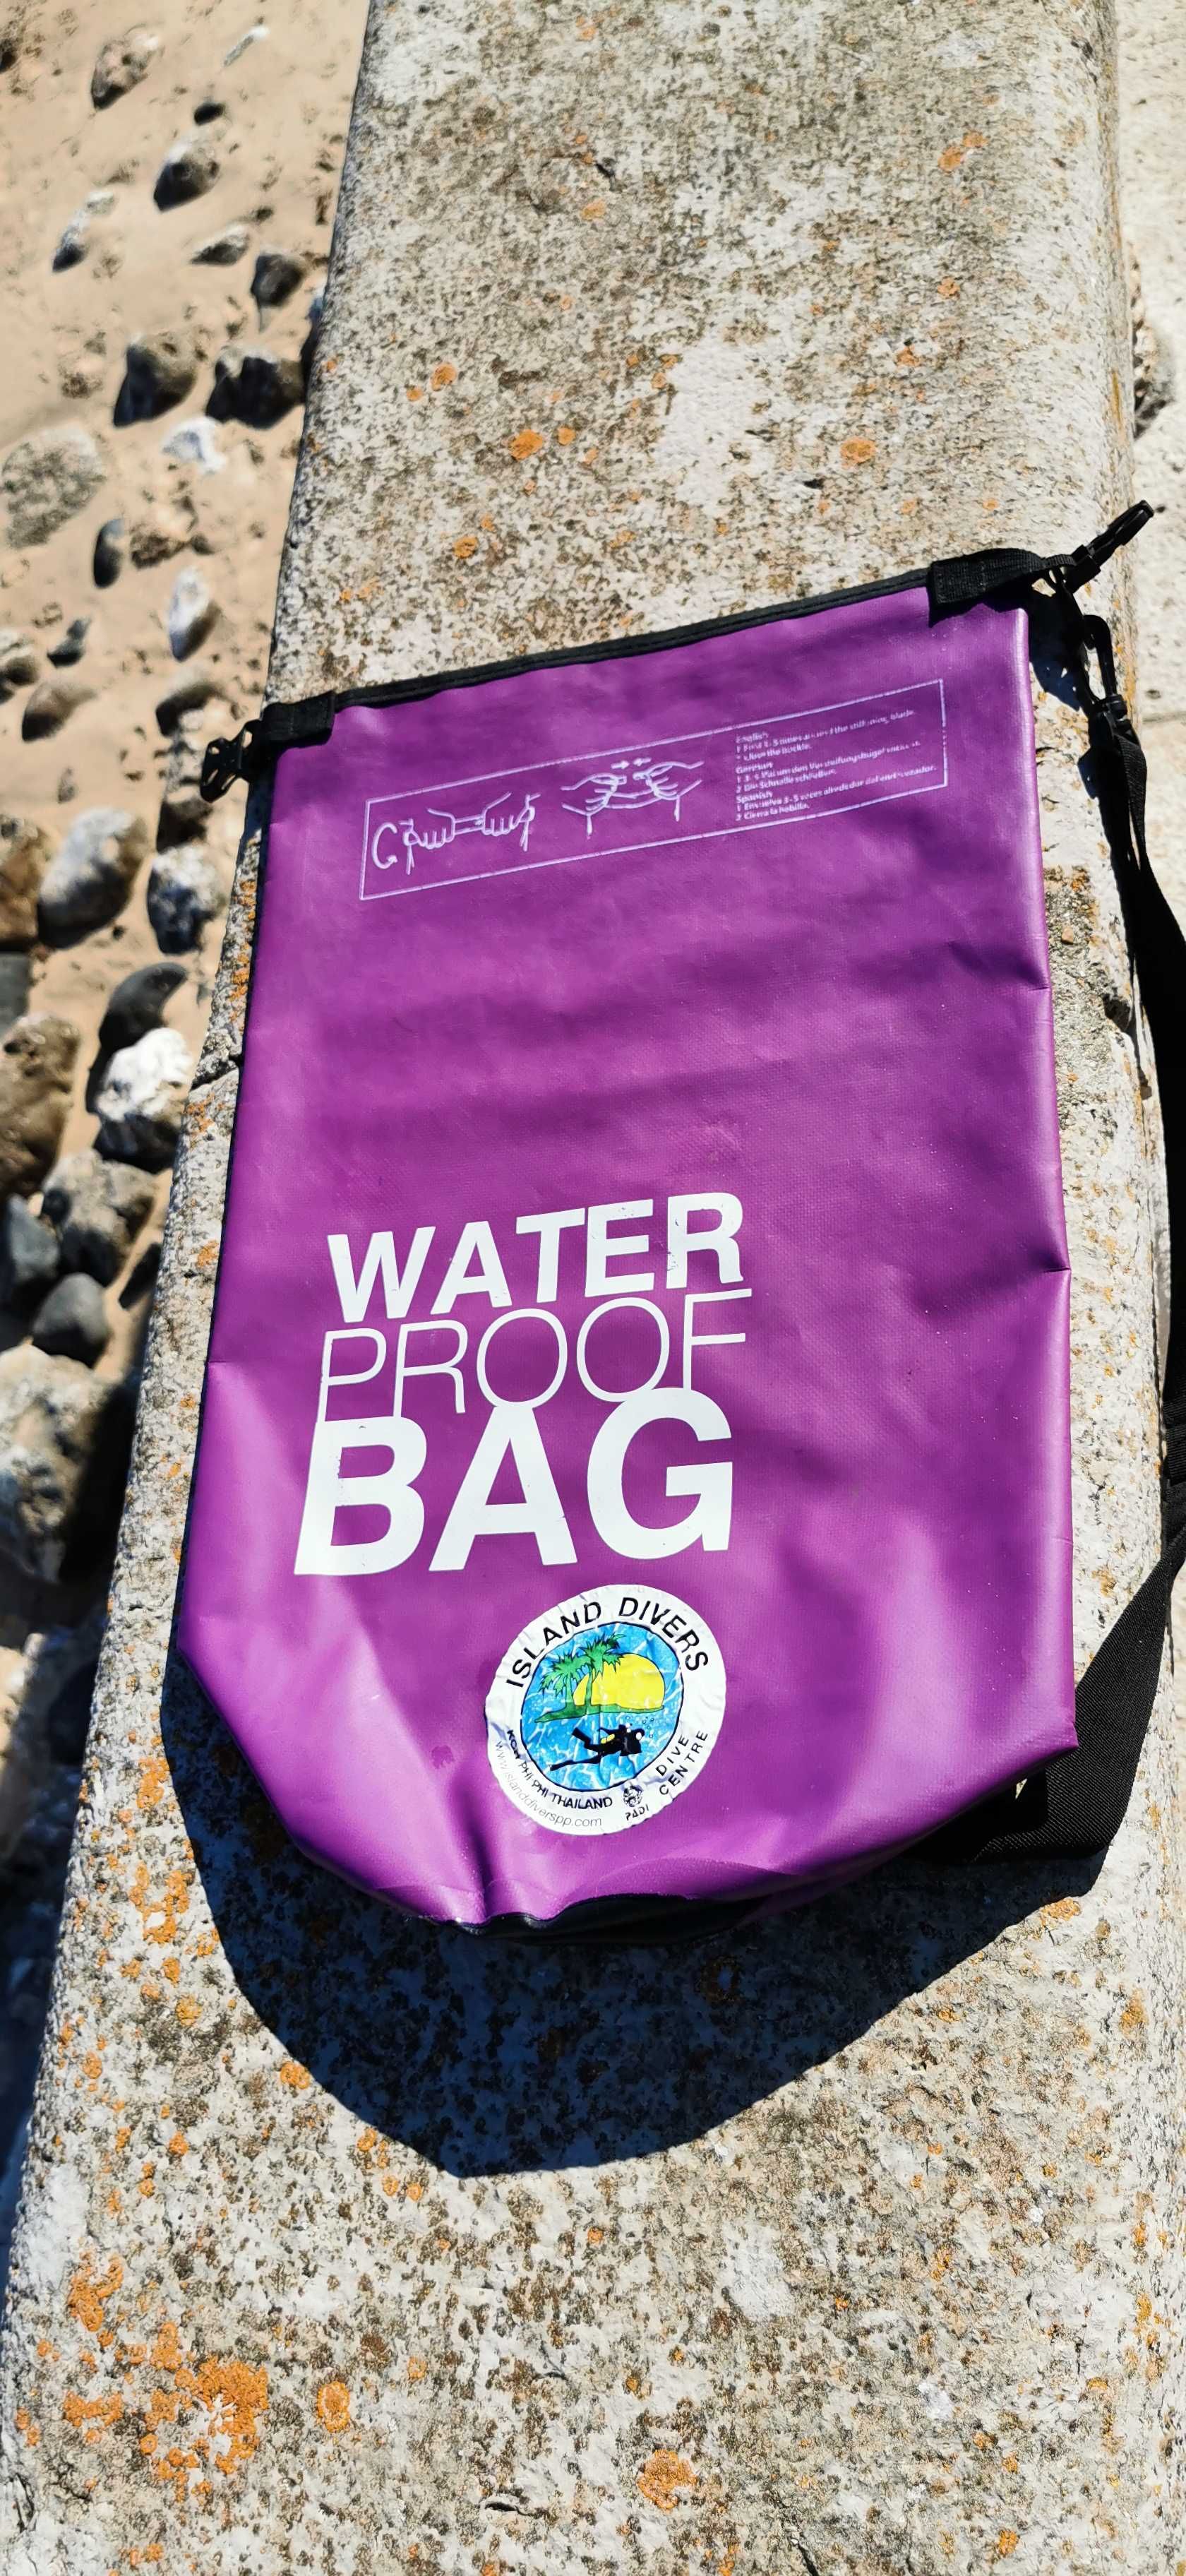 Water Proof Bag 20 lts